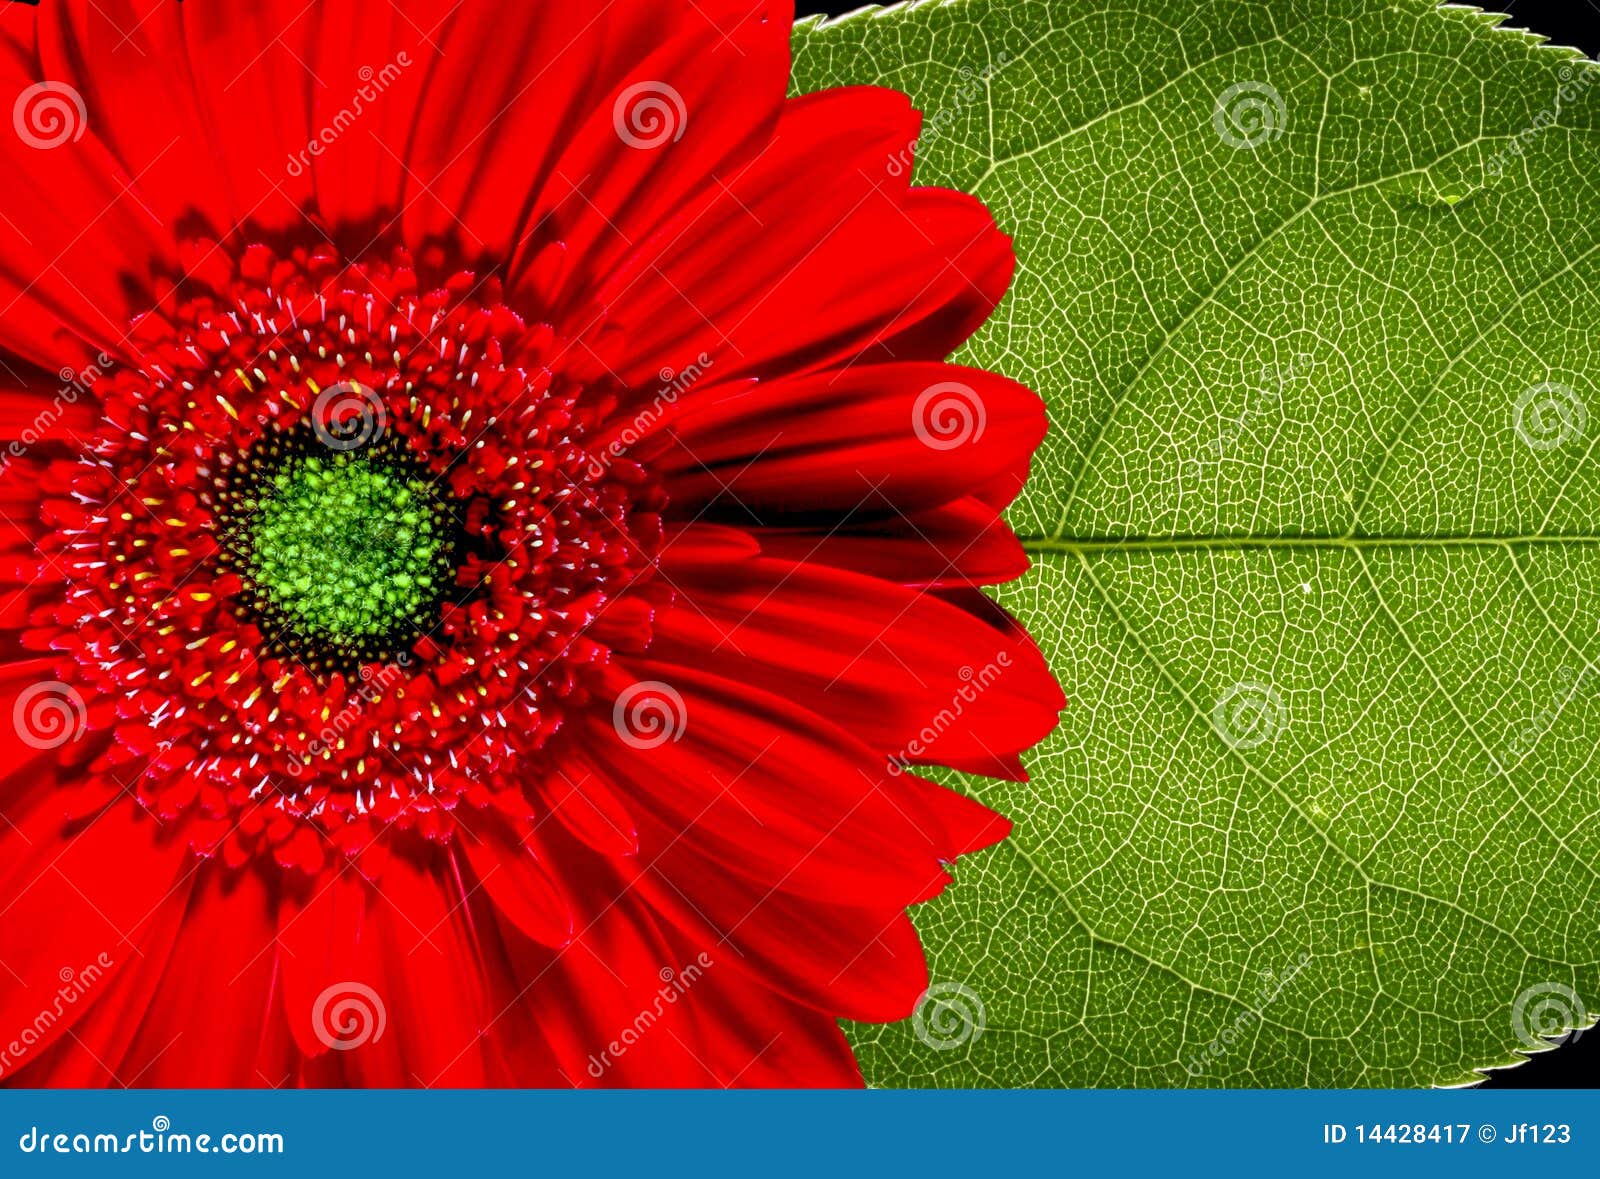 red gerbera daisy and leaf